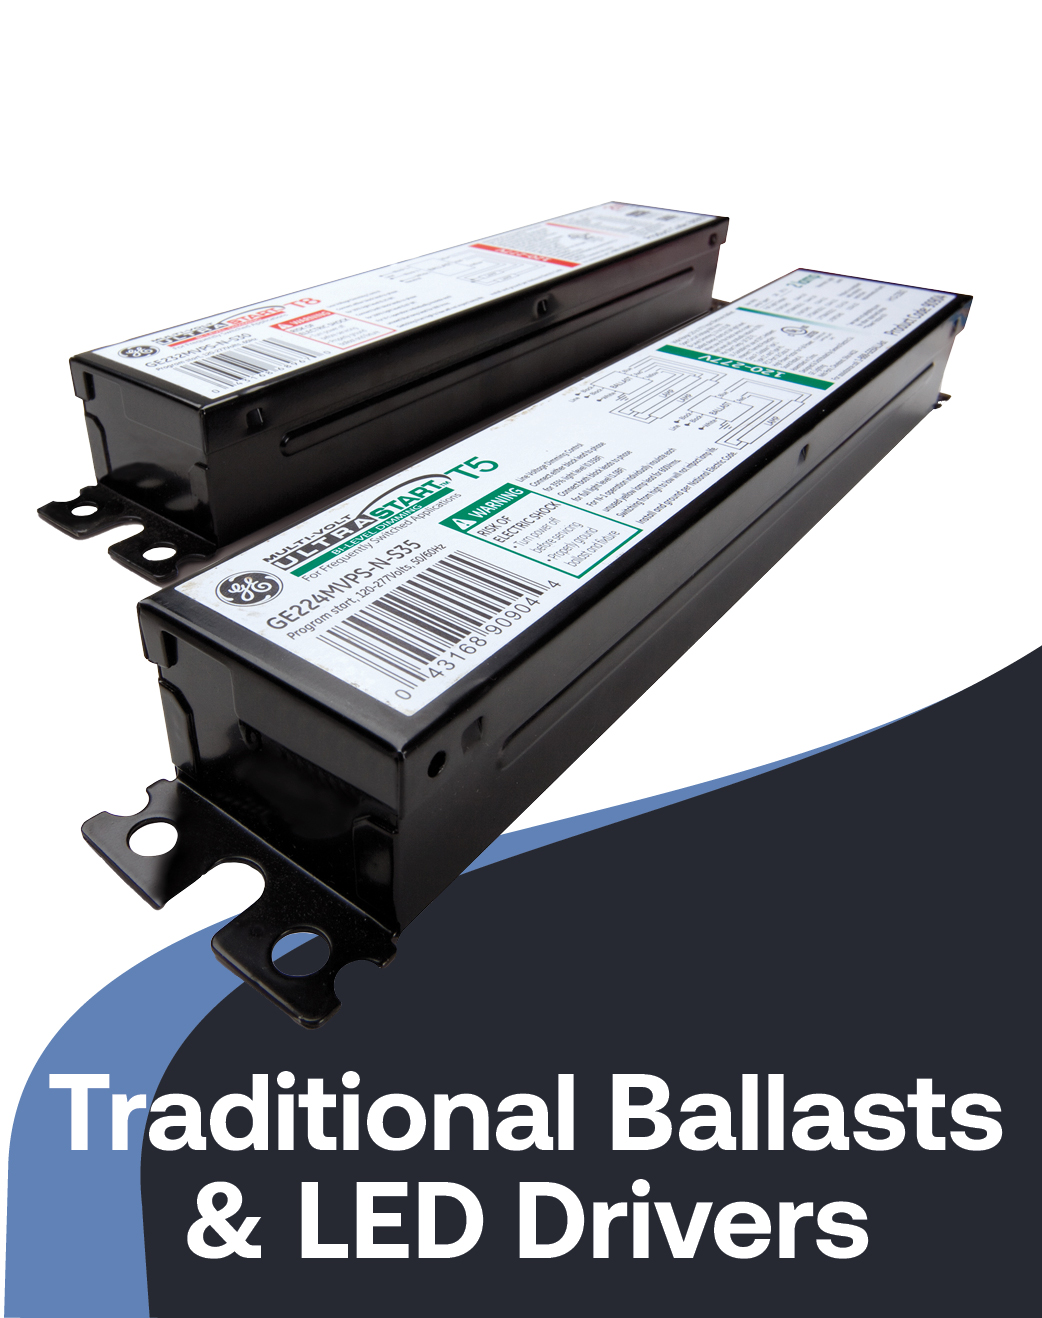 Traditional Ballasts & LED Drivers